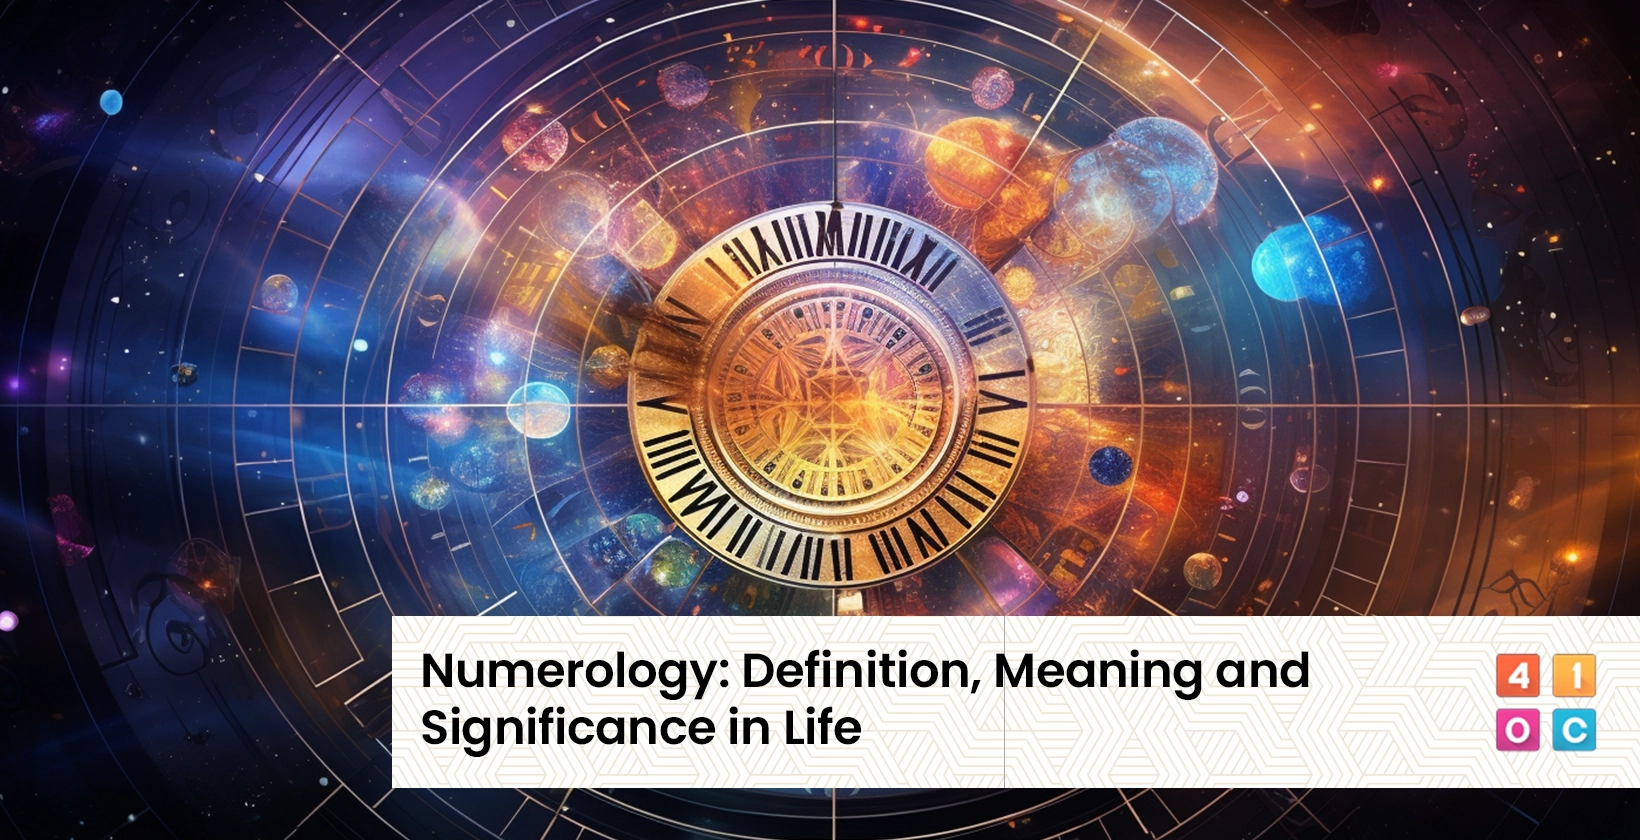 Numerology Definition Meaning and significance in life